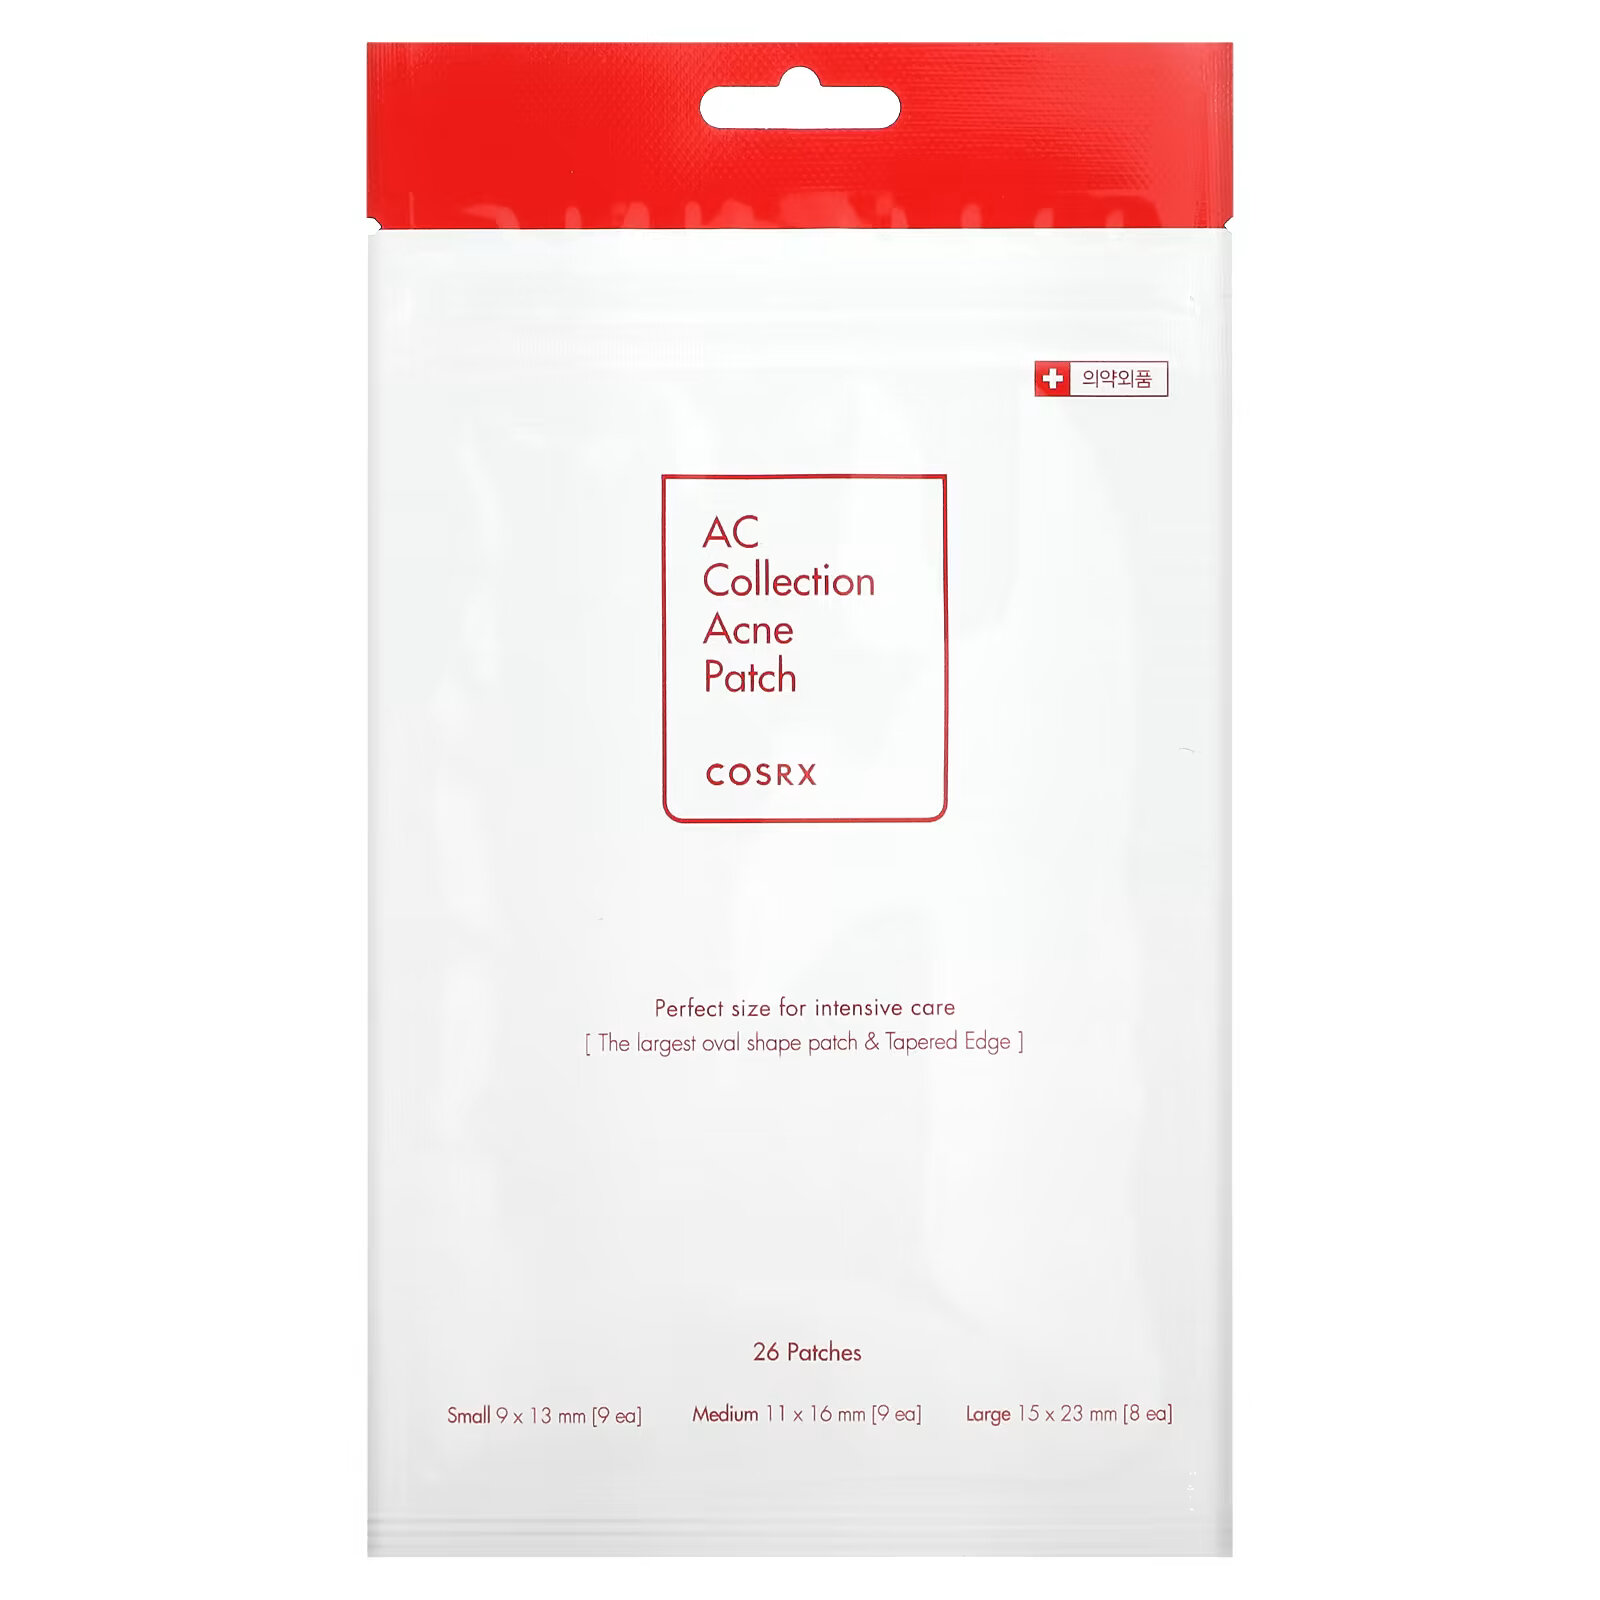 патчи от акне cosrx ac collection acne patch 26 шт Cosrx, AC Collection, патч от акне, 26 шт.